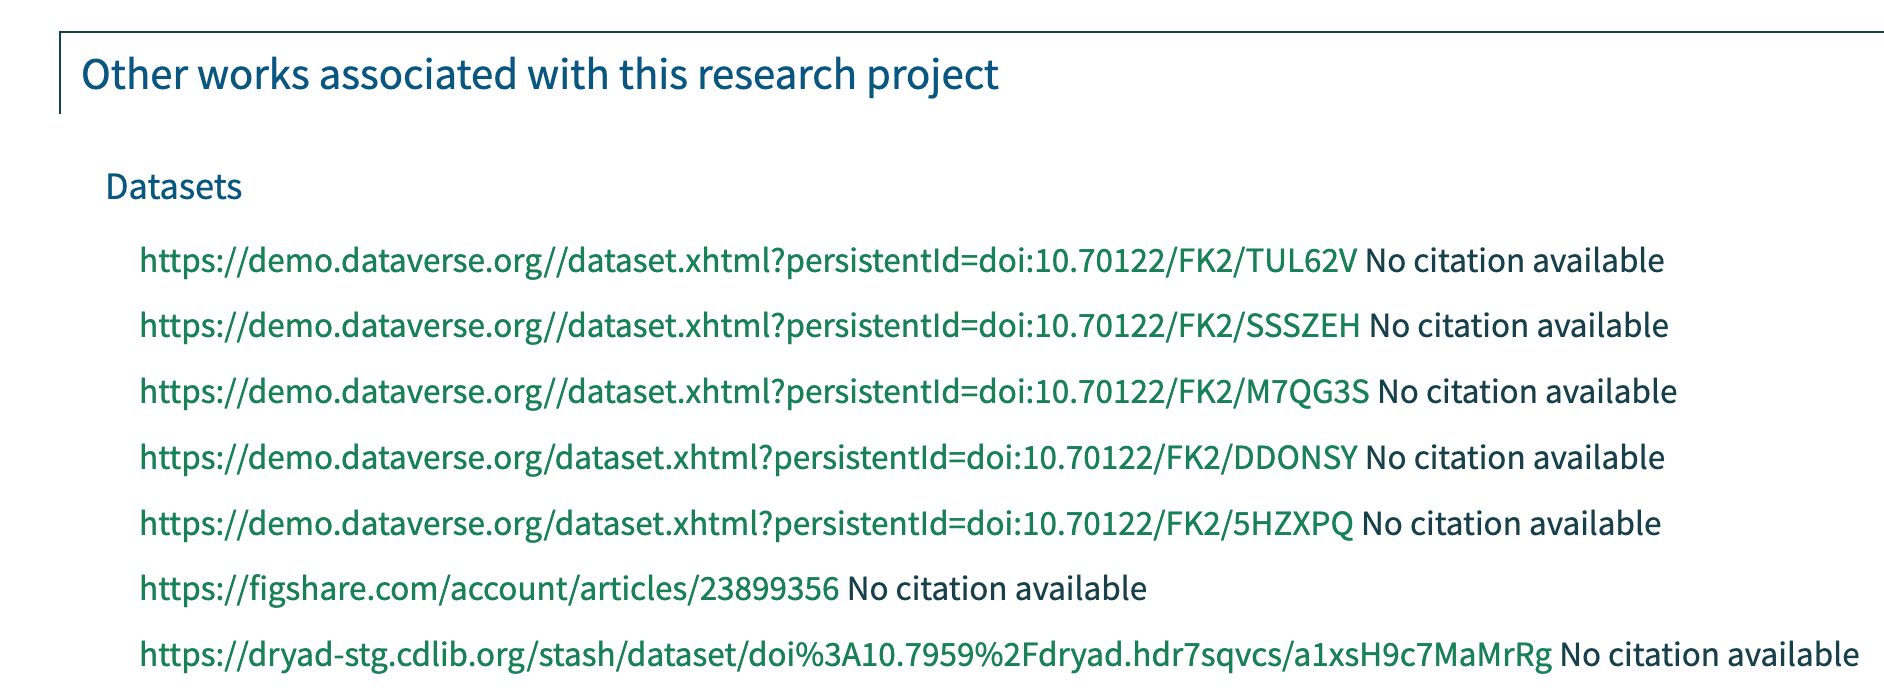 Partial screenshot of DMPHub showing a listing of deposited datasets in various repositories, all referenced from the DMP